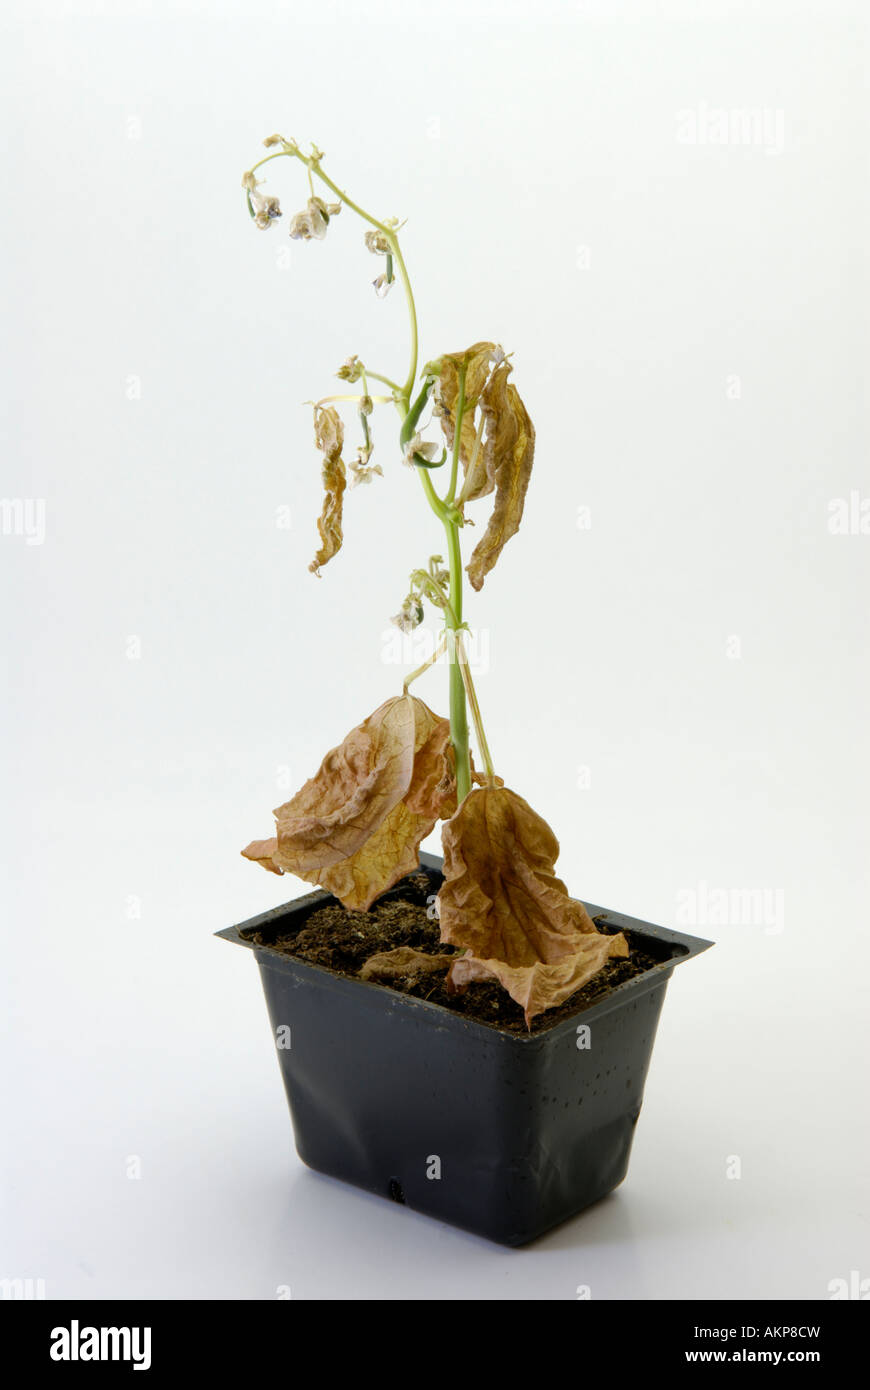 Dead, dying, dehydrated plant Stock Photo